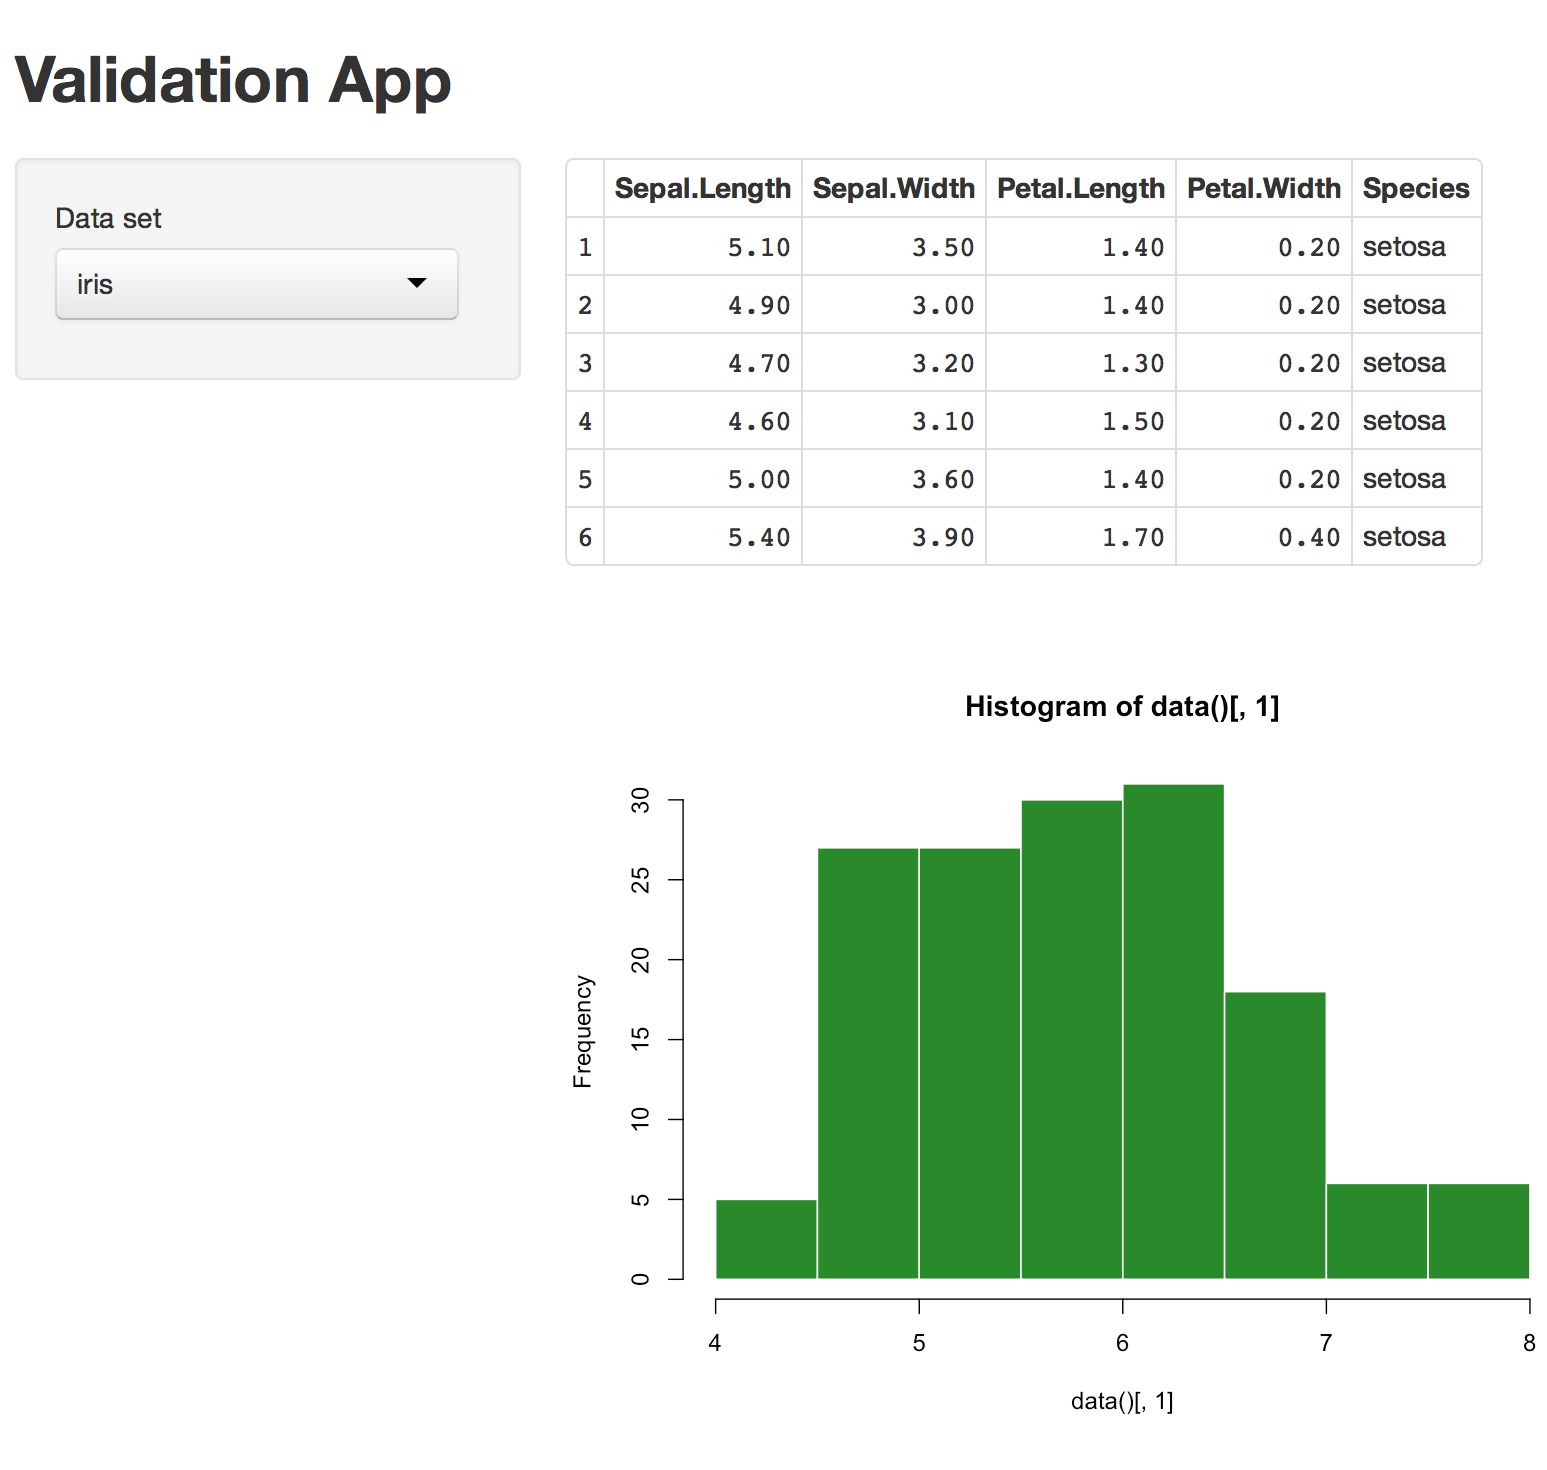 Validation app with data set iris selected, and a table and histogram of the iris dataset